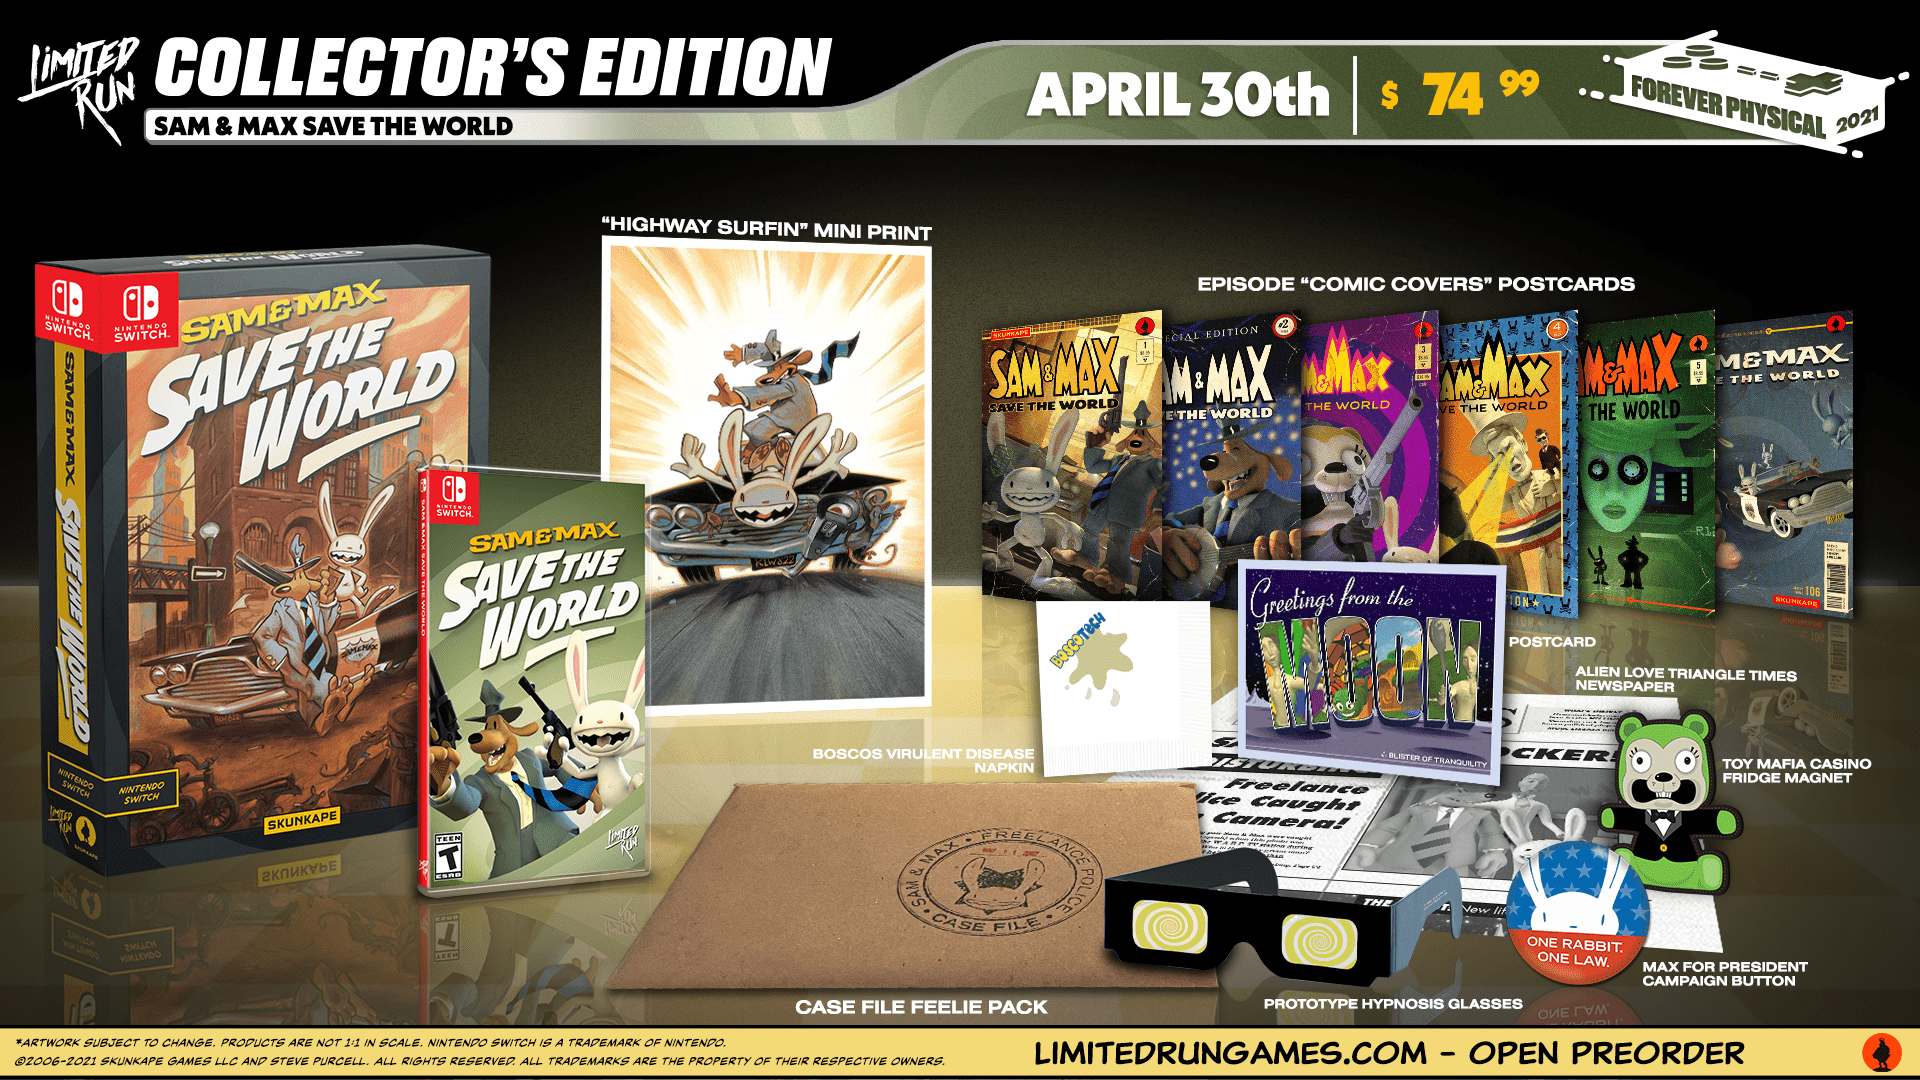 You are currently viewing Alright, little buddy: Sam & Max Save the World gets physical Limited Runs for Switch & PC starting Friday, April 30 at 10am ET!